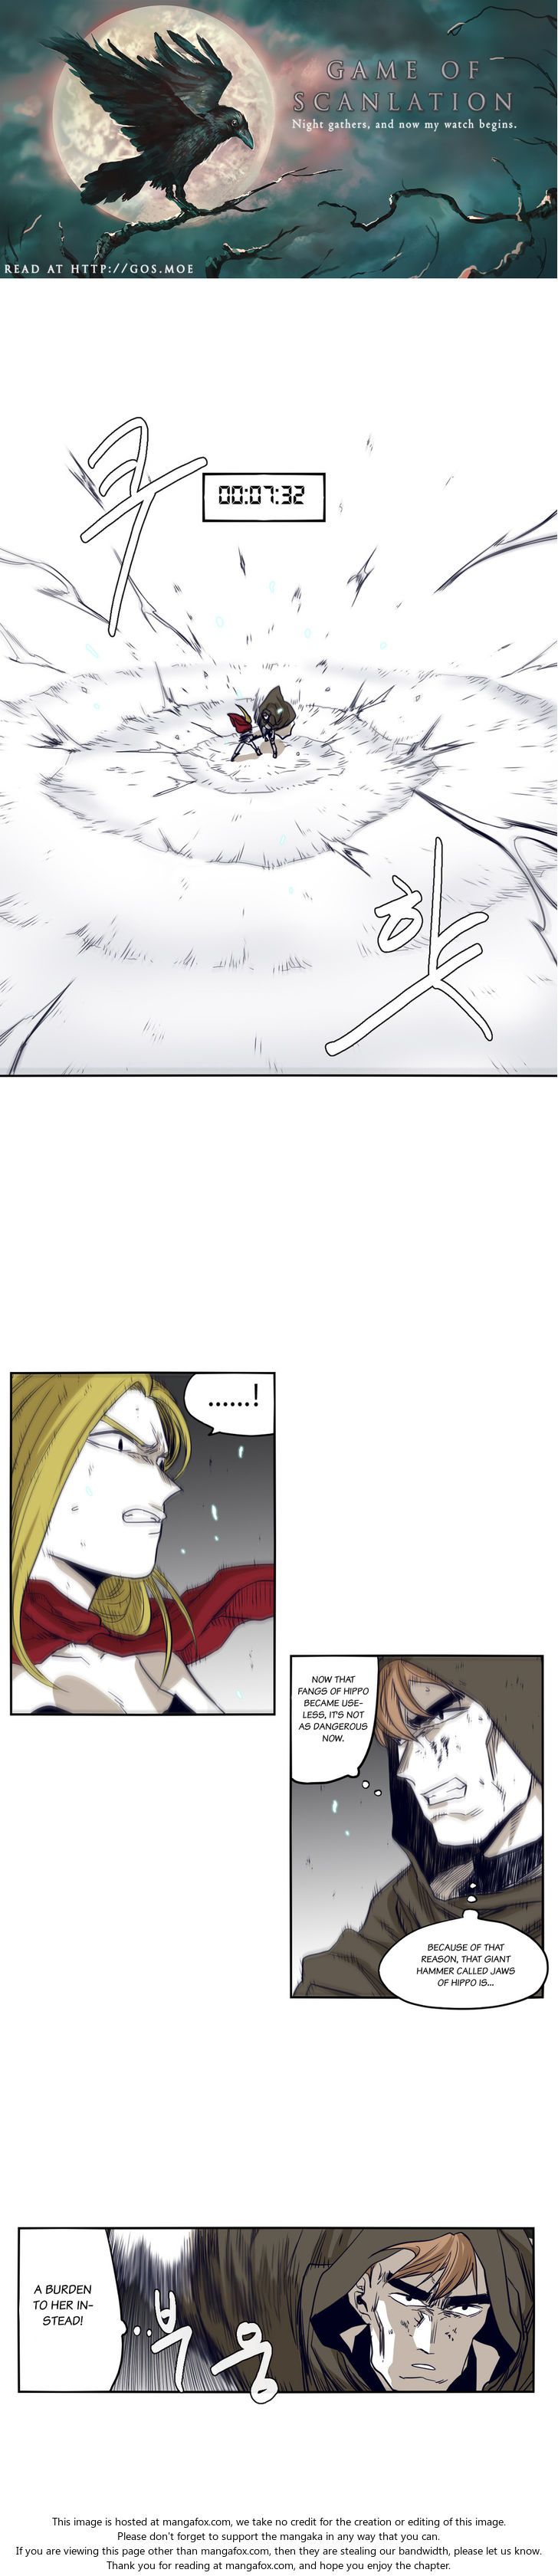 Epic of Gilgamesh Chapter 045 page 2